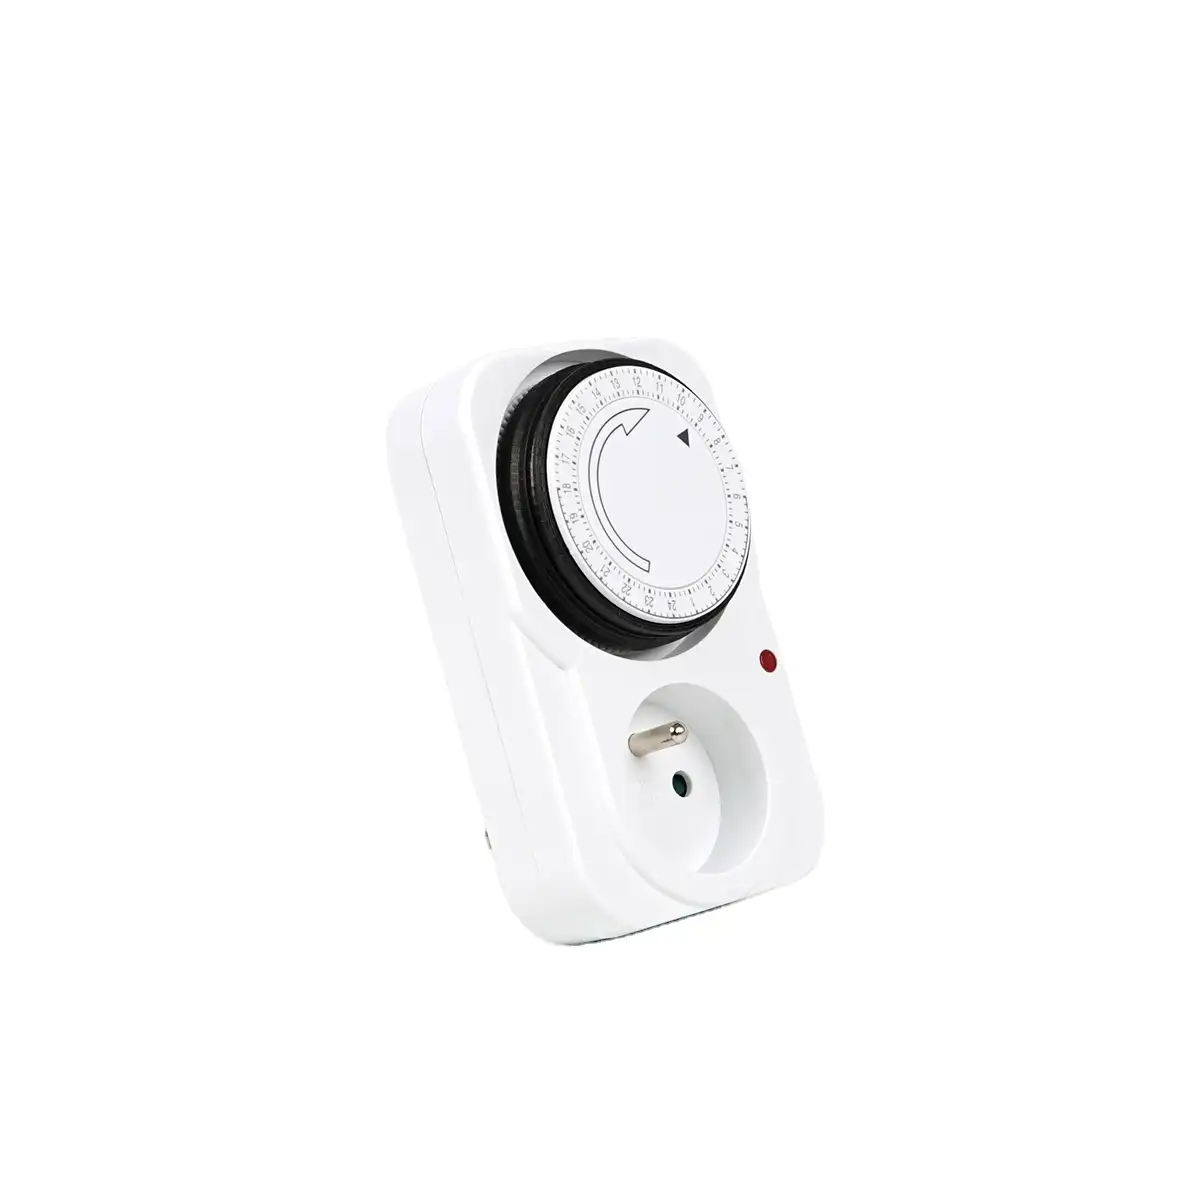 Daily CE 240V Electronic Programmable Grounded Plug In Time Timer Outlet Manual 24 Hour Interval Electrical Mechanical Timer